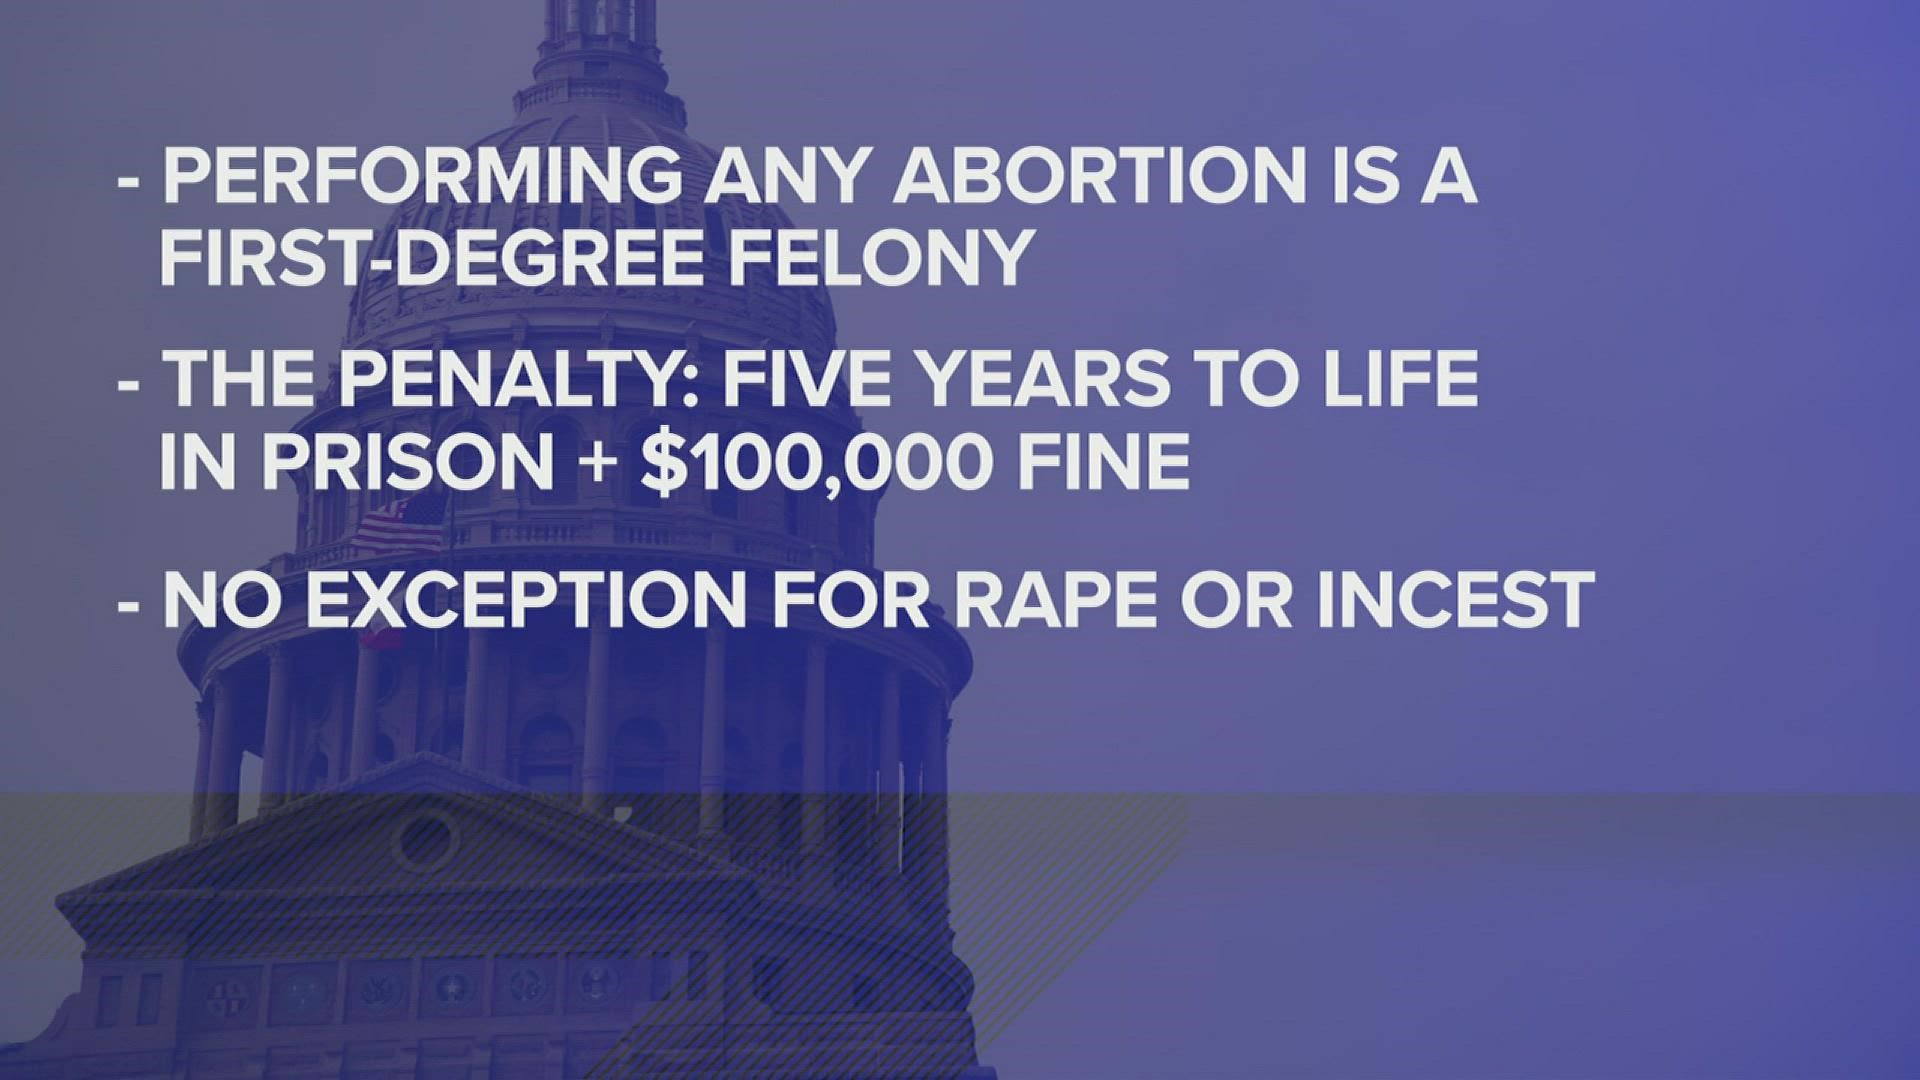 Almost all abortions are now illegal in Texas.